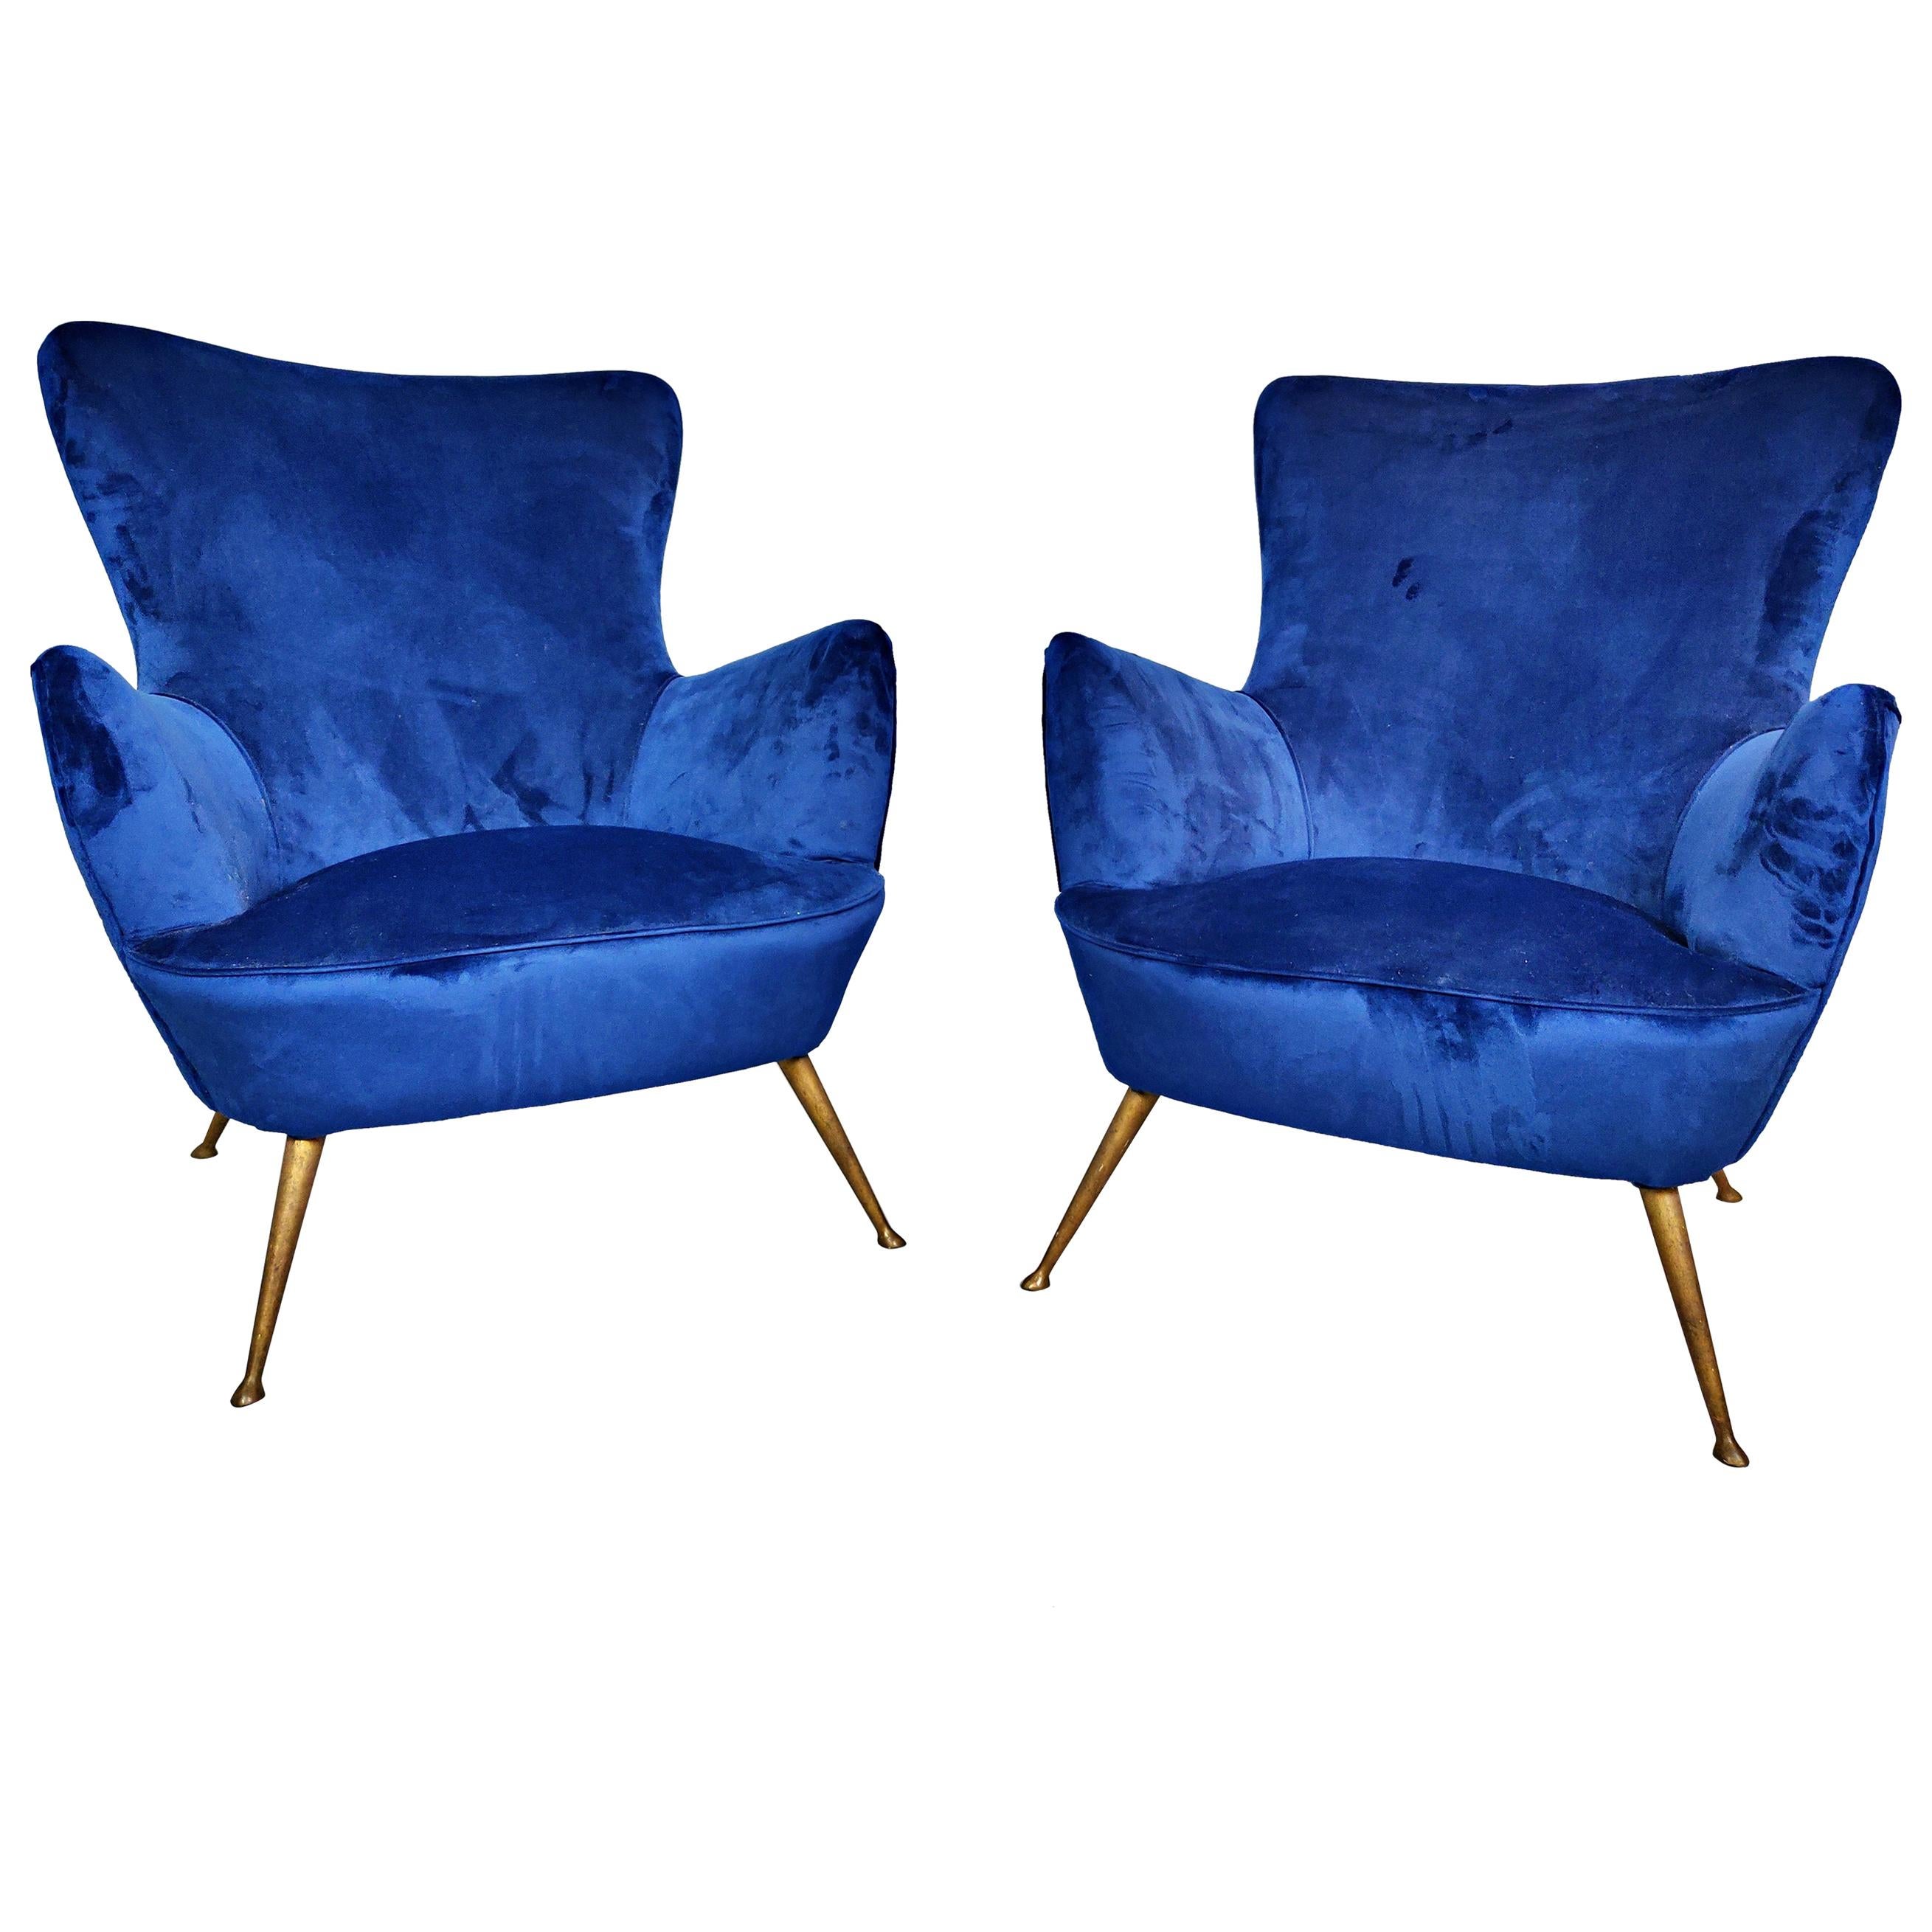 Pair of Italian Armchairs, New Upholstery, 1950s For Sale